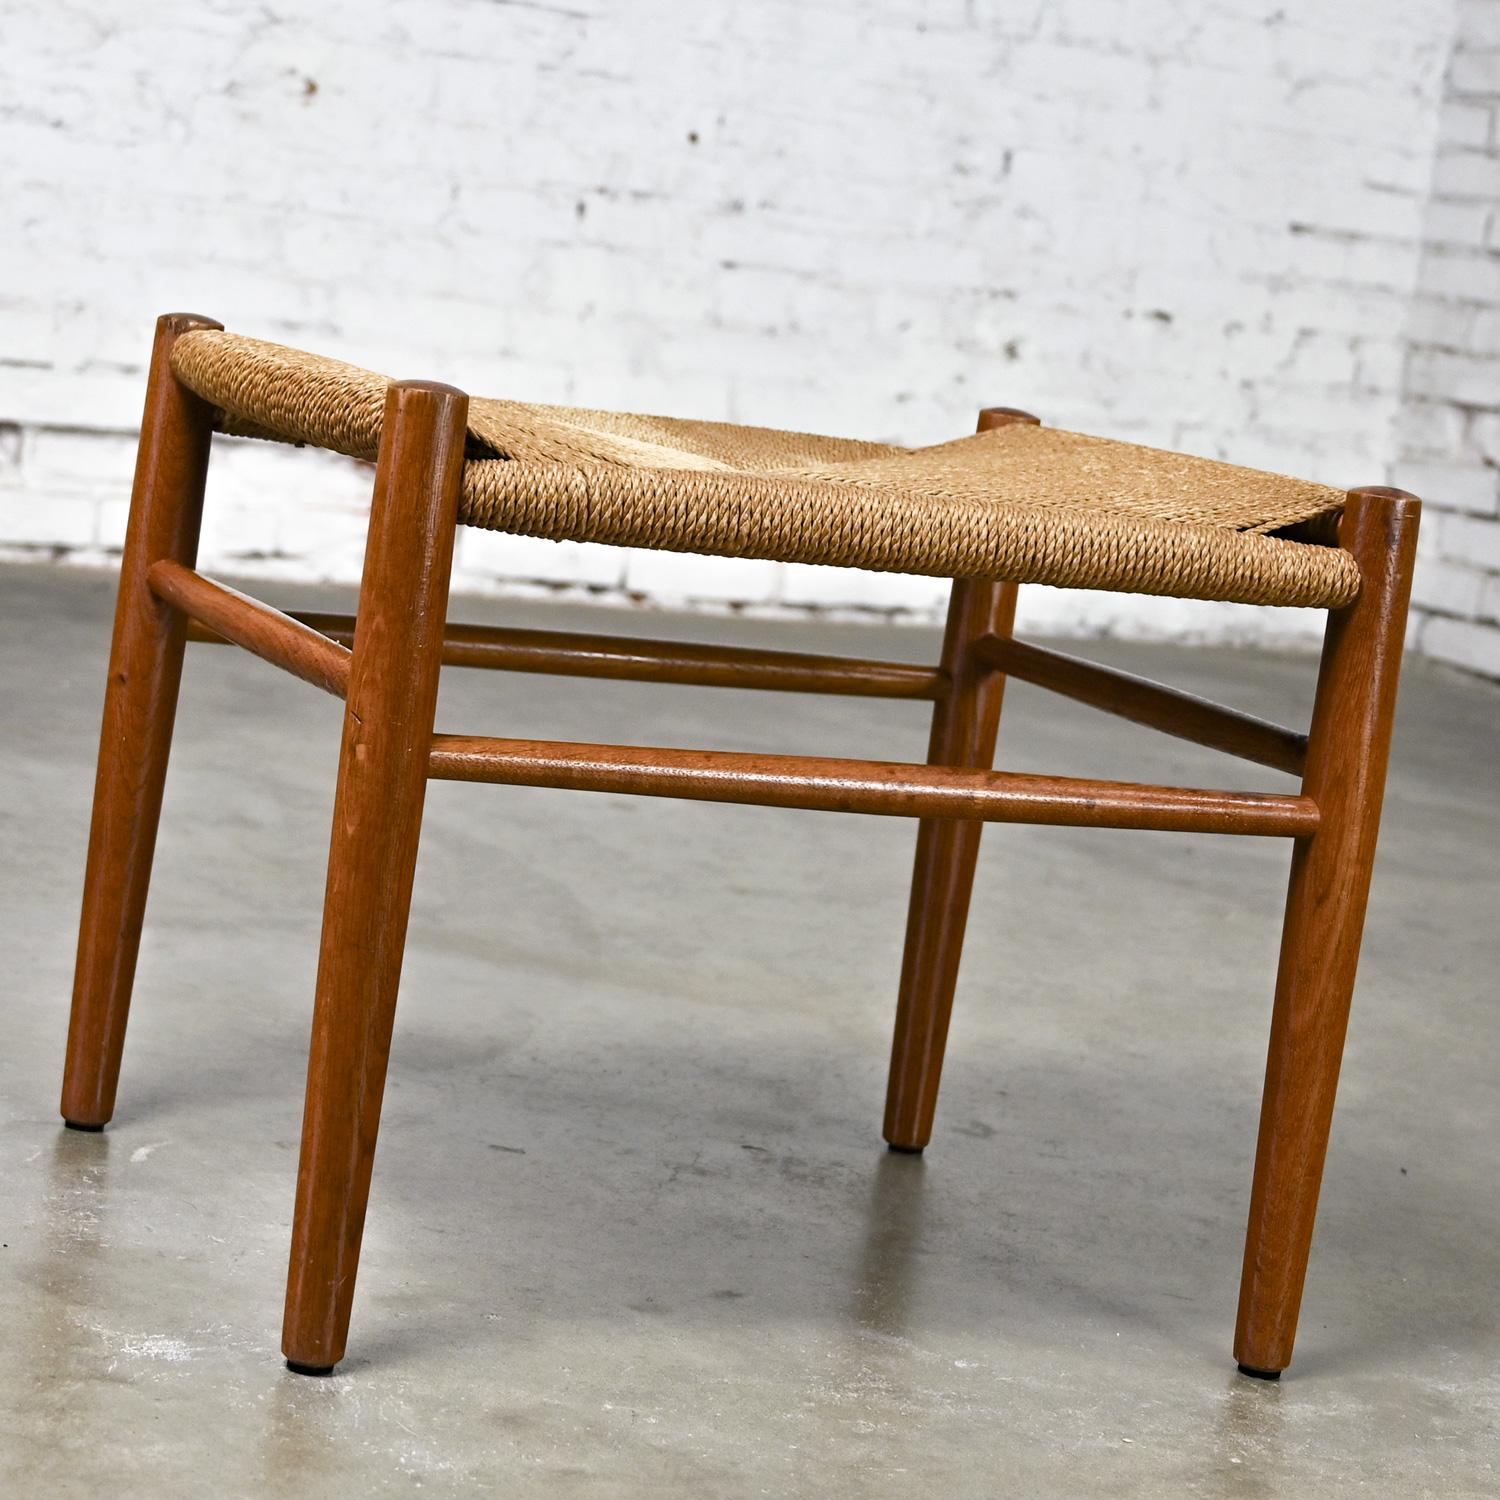 Mid-20th Century Scandinavian Modern Low Stool Teak with Natural Paper Cord Seat 2